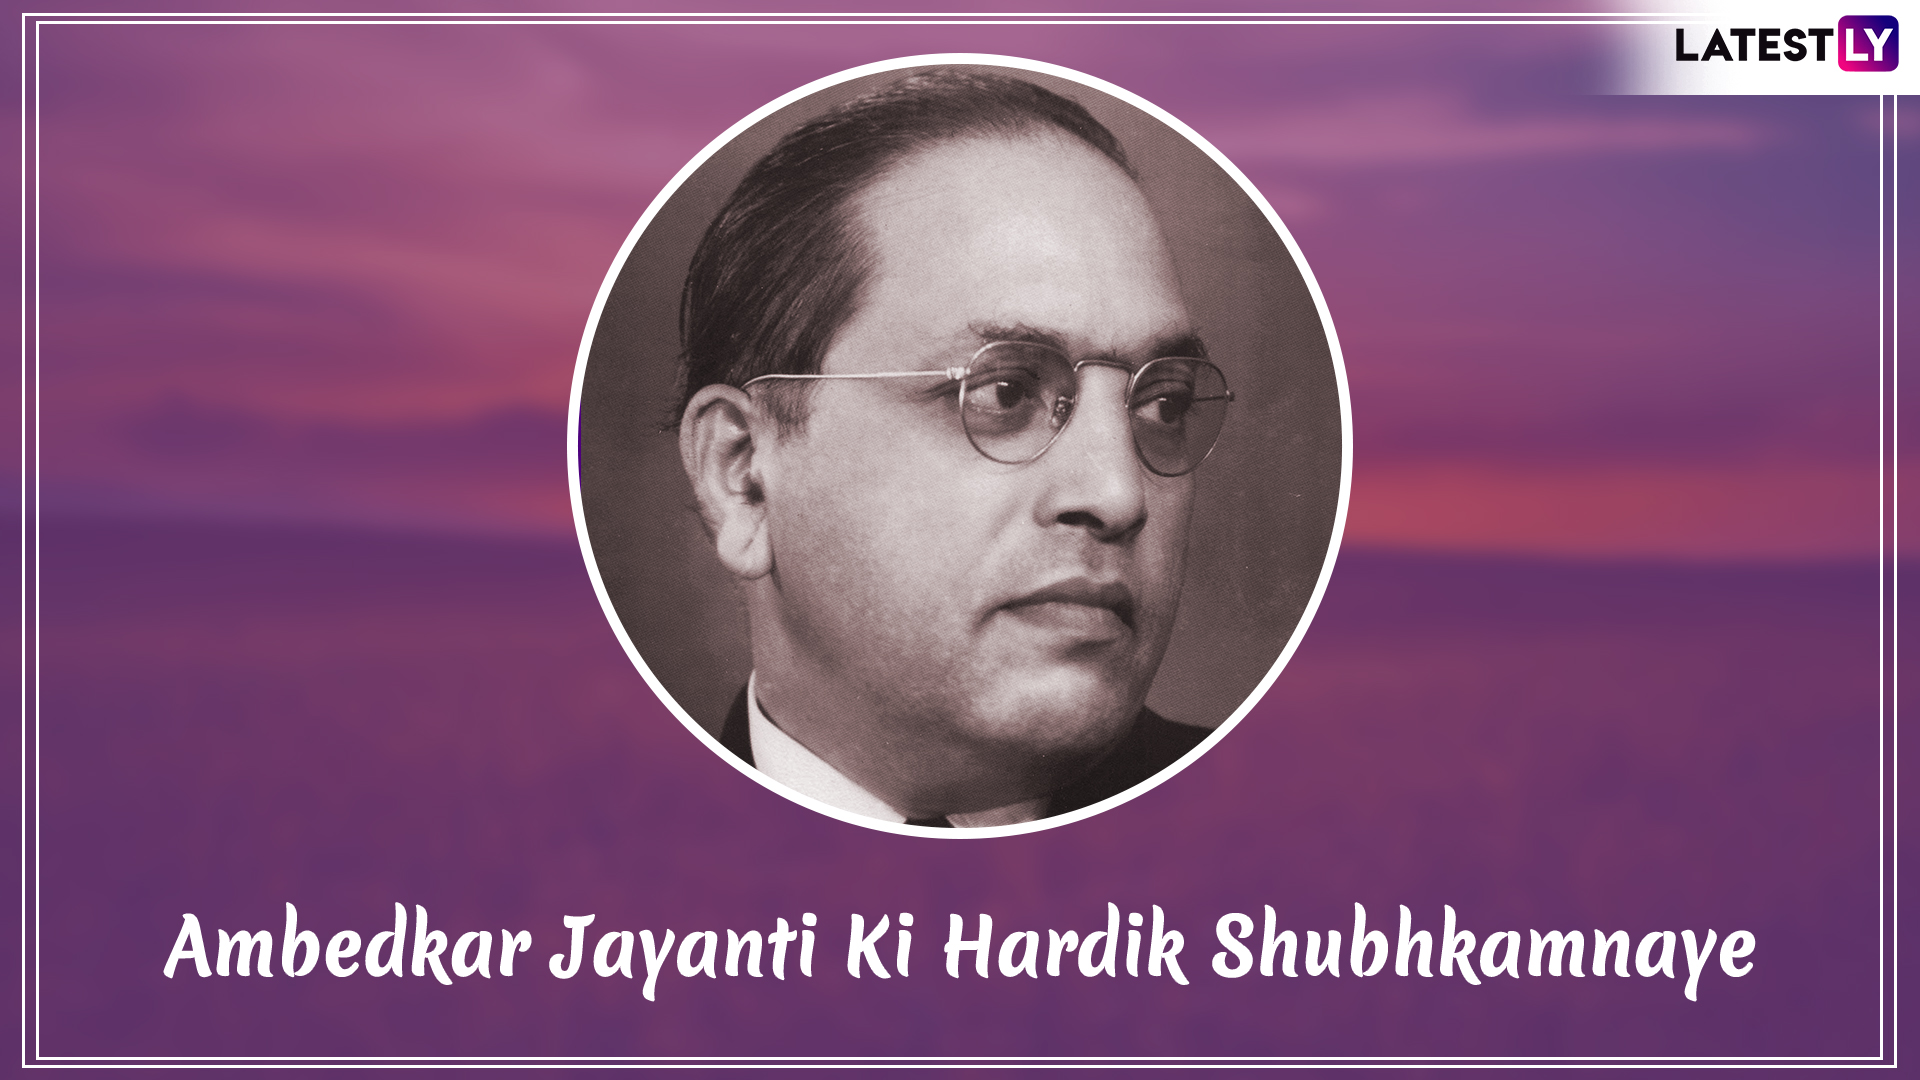 Ambedkar Jayanti 2019 Images With Quotes Hd Wallpapers For Free